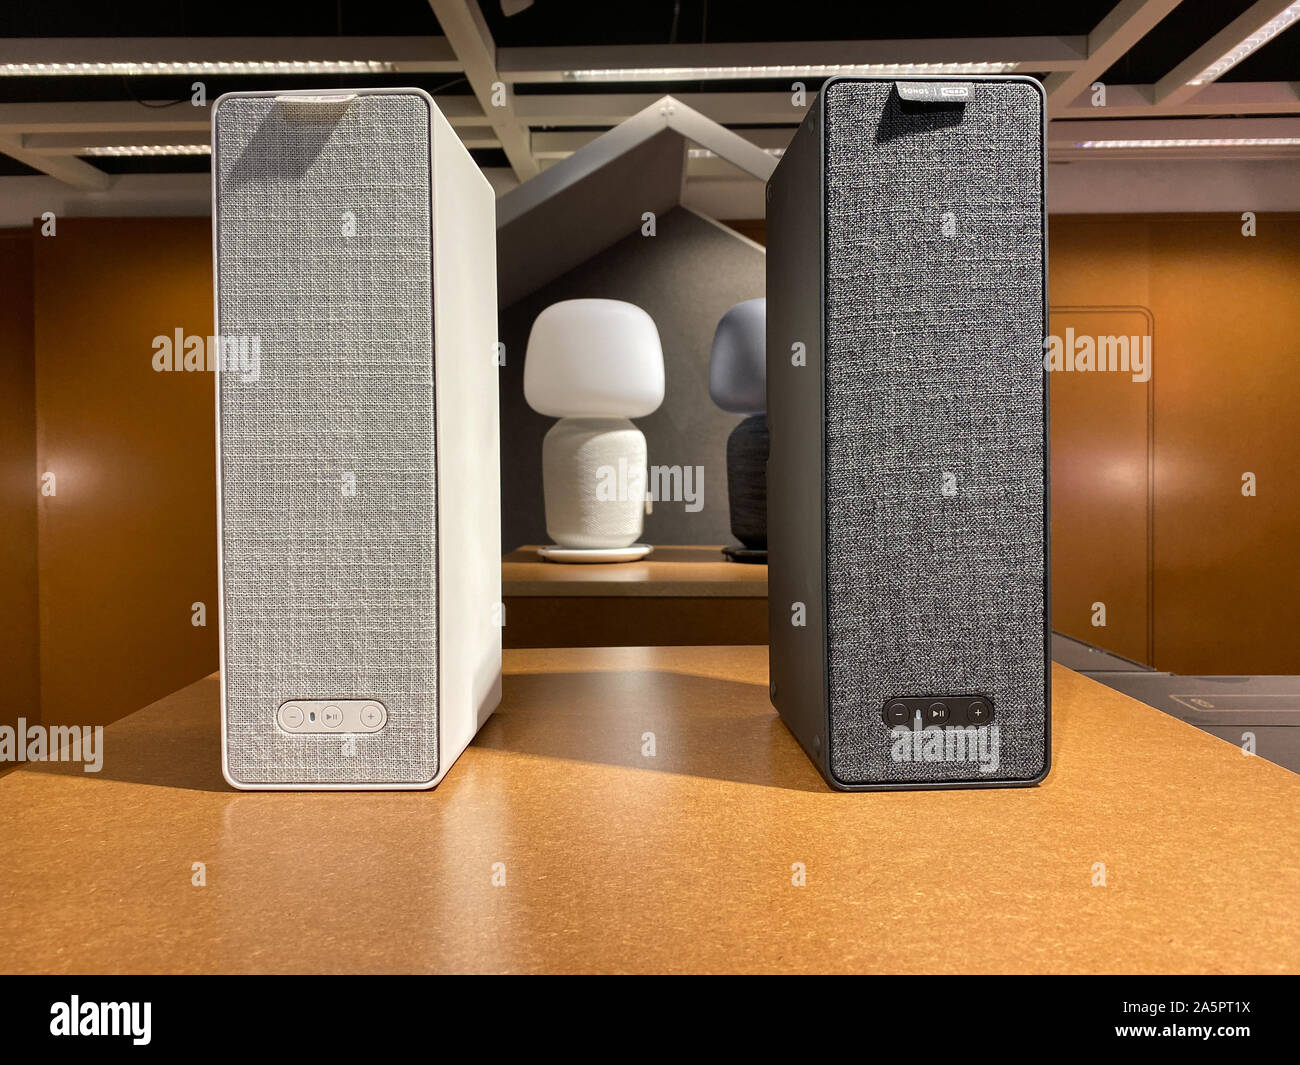 Orlando, FL/USA -10/19/19:Sonos speakers on display at Sonos is an consumer electronics company that is known for the speakers i Stock Photo - Alamy